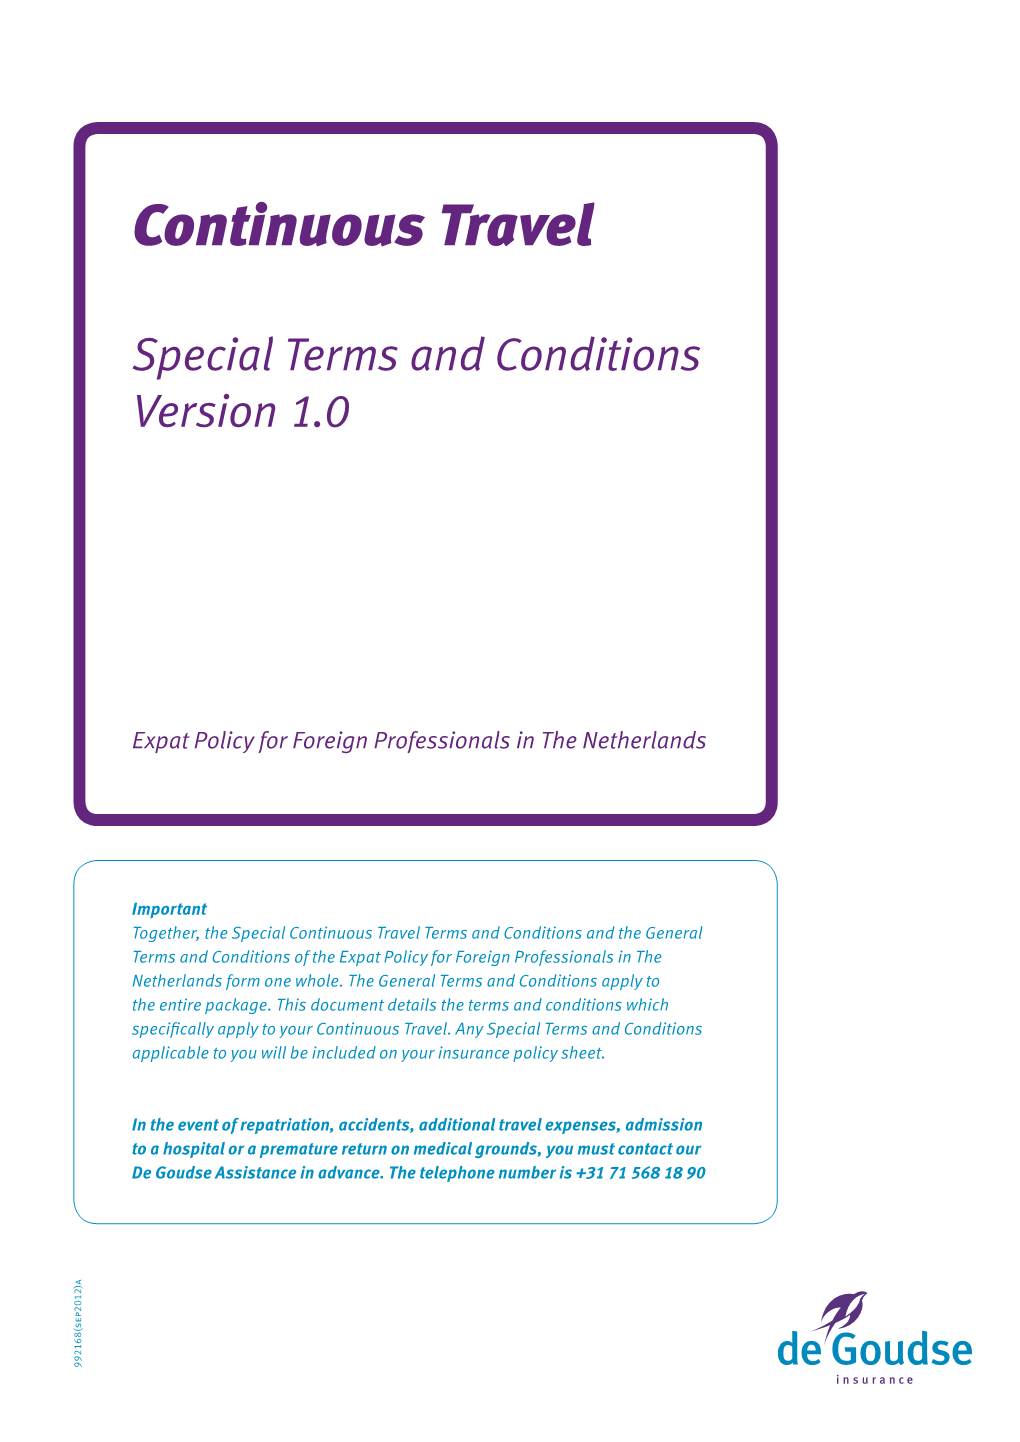 Special Terms and Conditions Continuous Travel